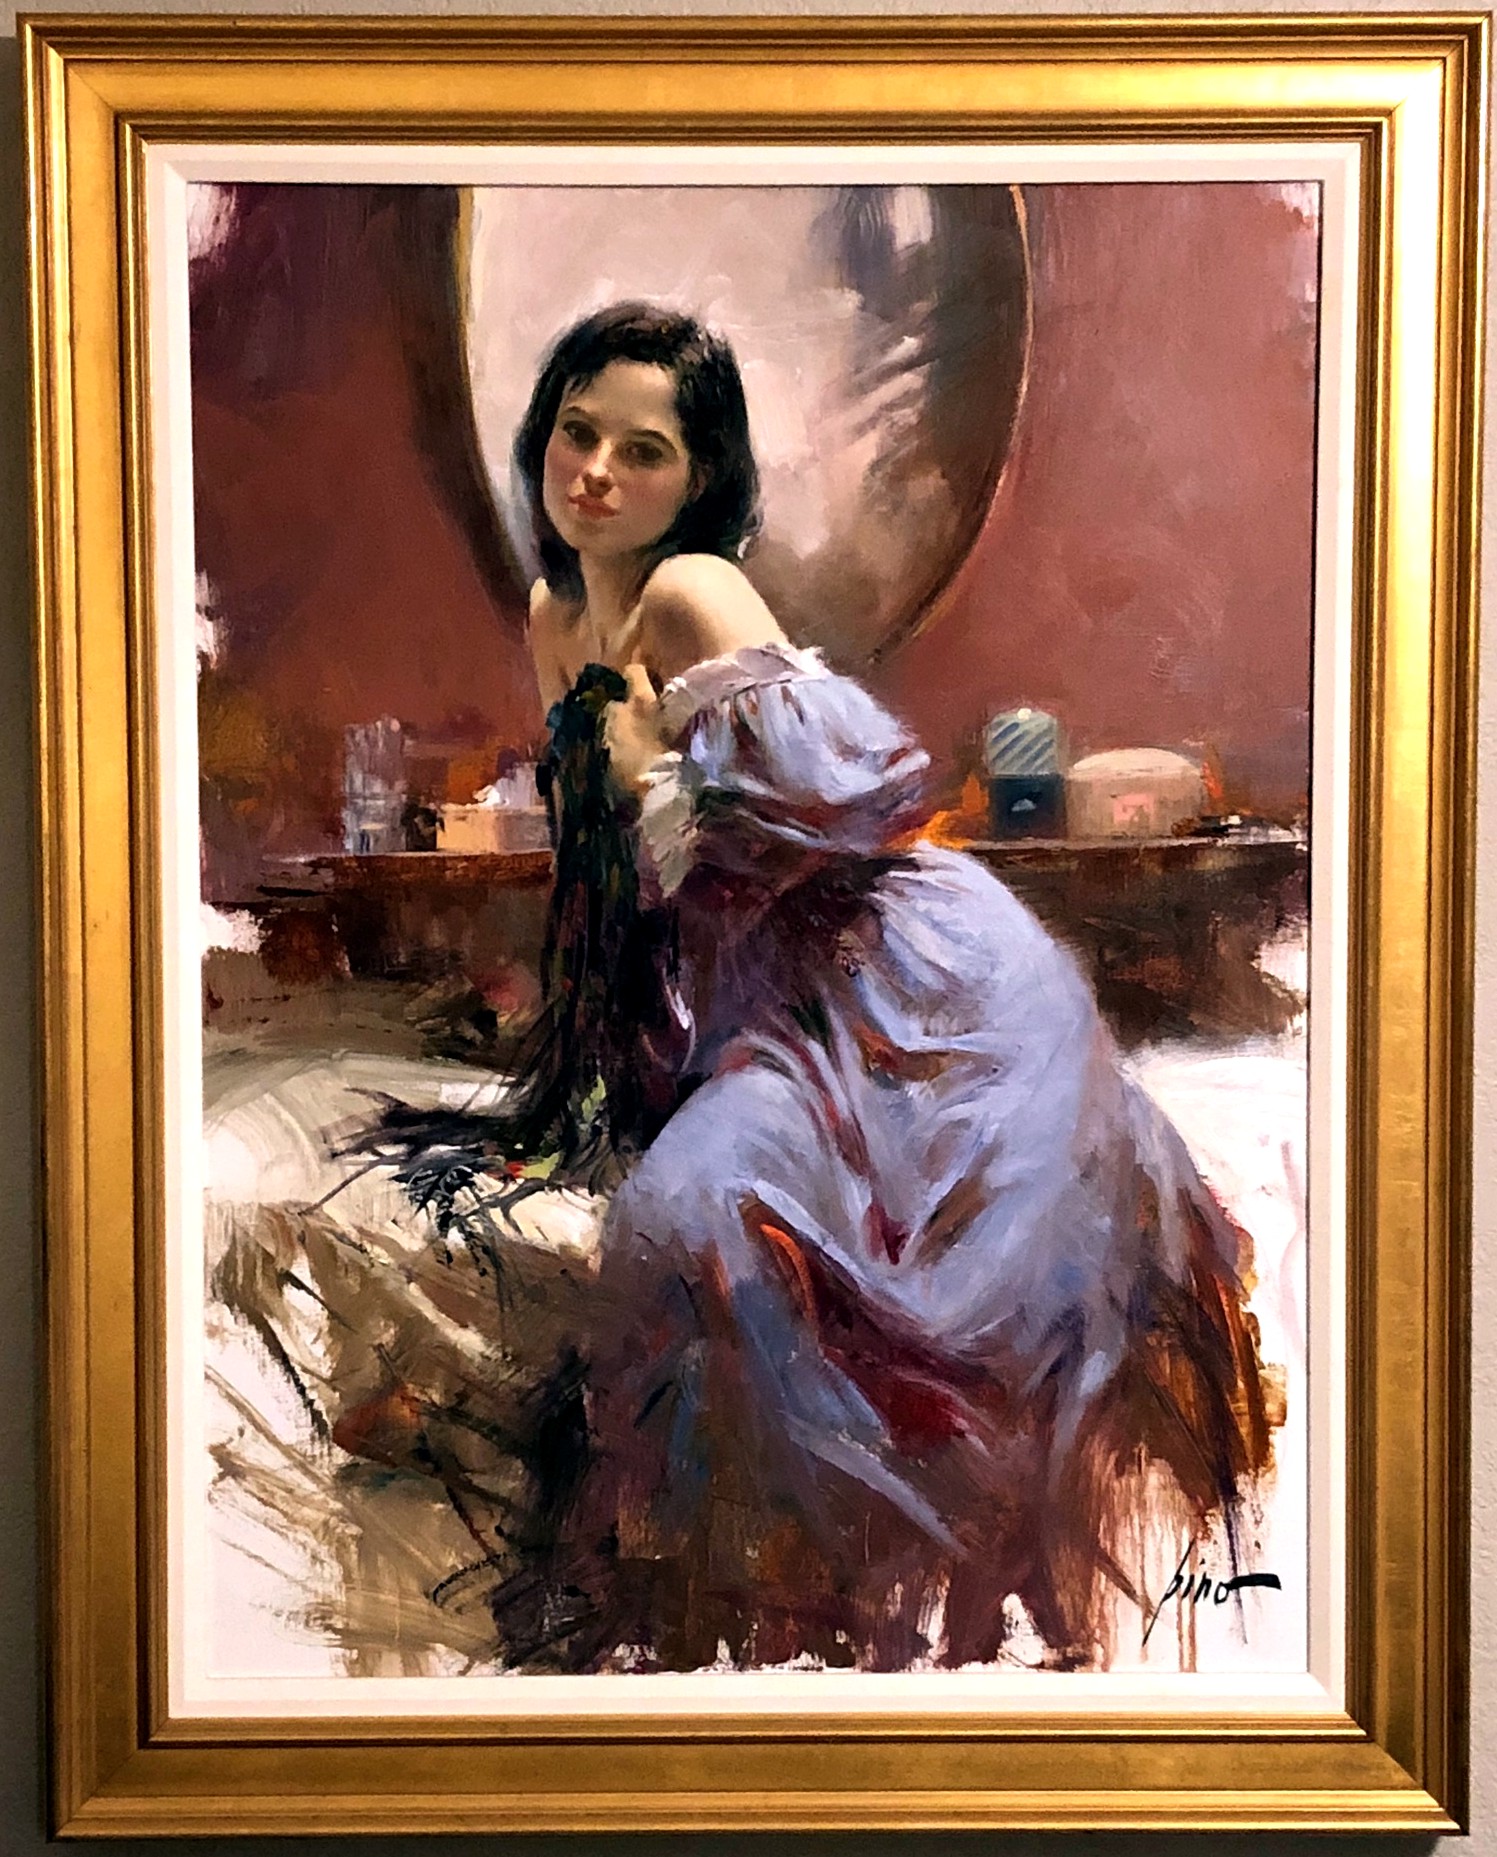 VANITY by Pino

Original Painting, Oil on Canvas

Size: 40 x 30